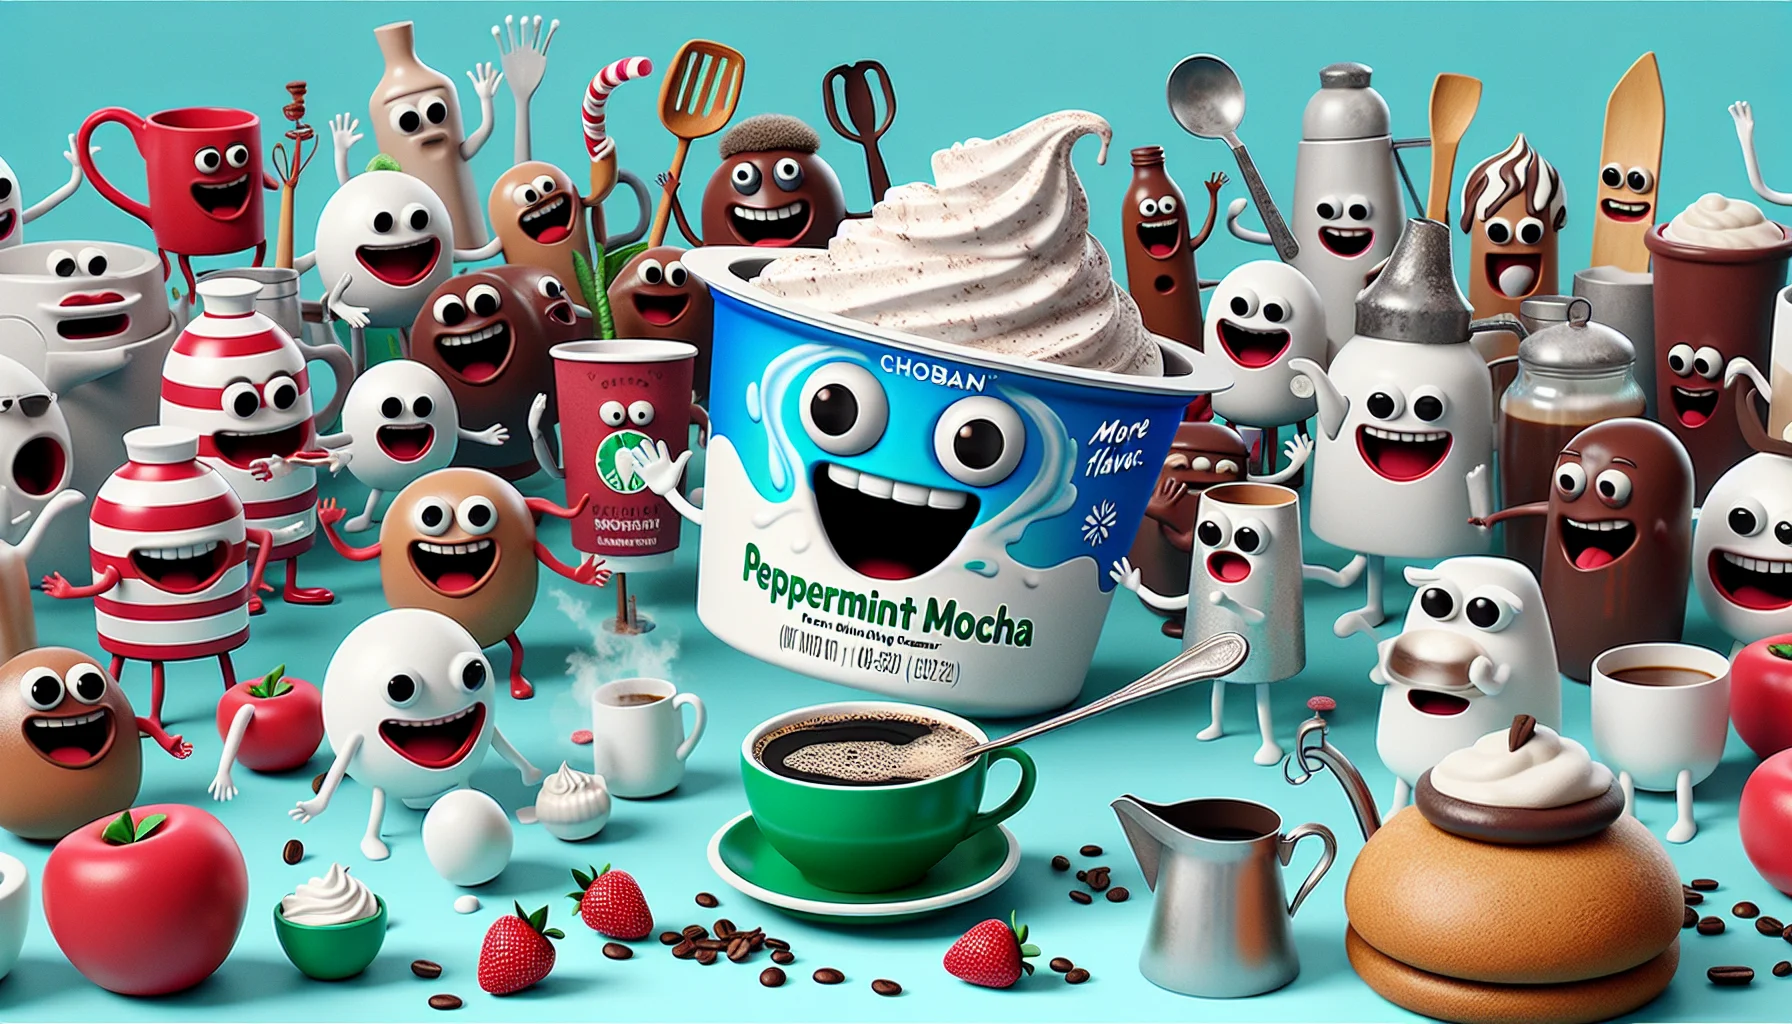 Imagine a humorous scenario featuring a container of peppermint mocha creamer, akin to what one might find from Chobani, as the centerpiece. This creamer has taken on a life of its own, with exaggerated googly eyes and a wide, beaming smile painted onto the packaging. It's attempting to pour itself into a steaming cup of black coffee, while a crowd of diverse friendly kitchen utensils watches with amazement and anticipation. A frothy latte is holding a sign that reads 'More Flavor, More Fun!' to bring an extra dash of fun and promotional charm to the scene.